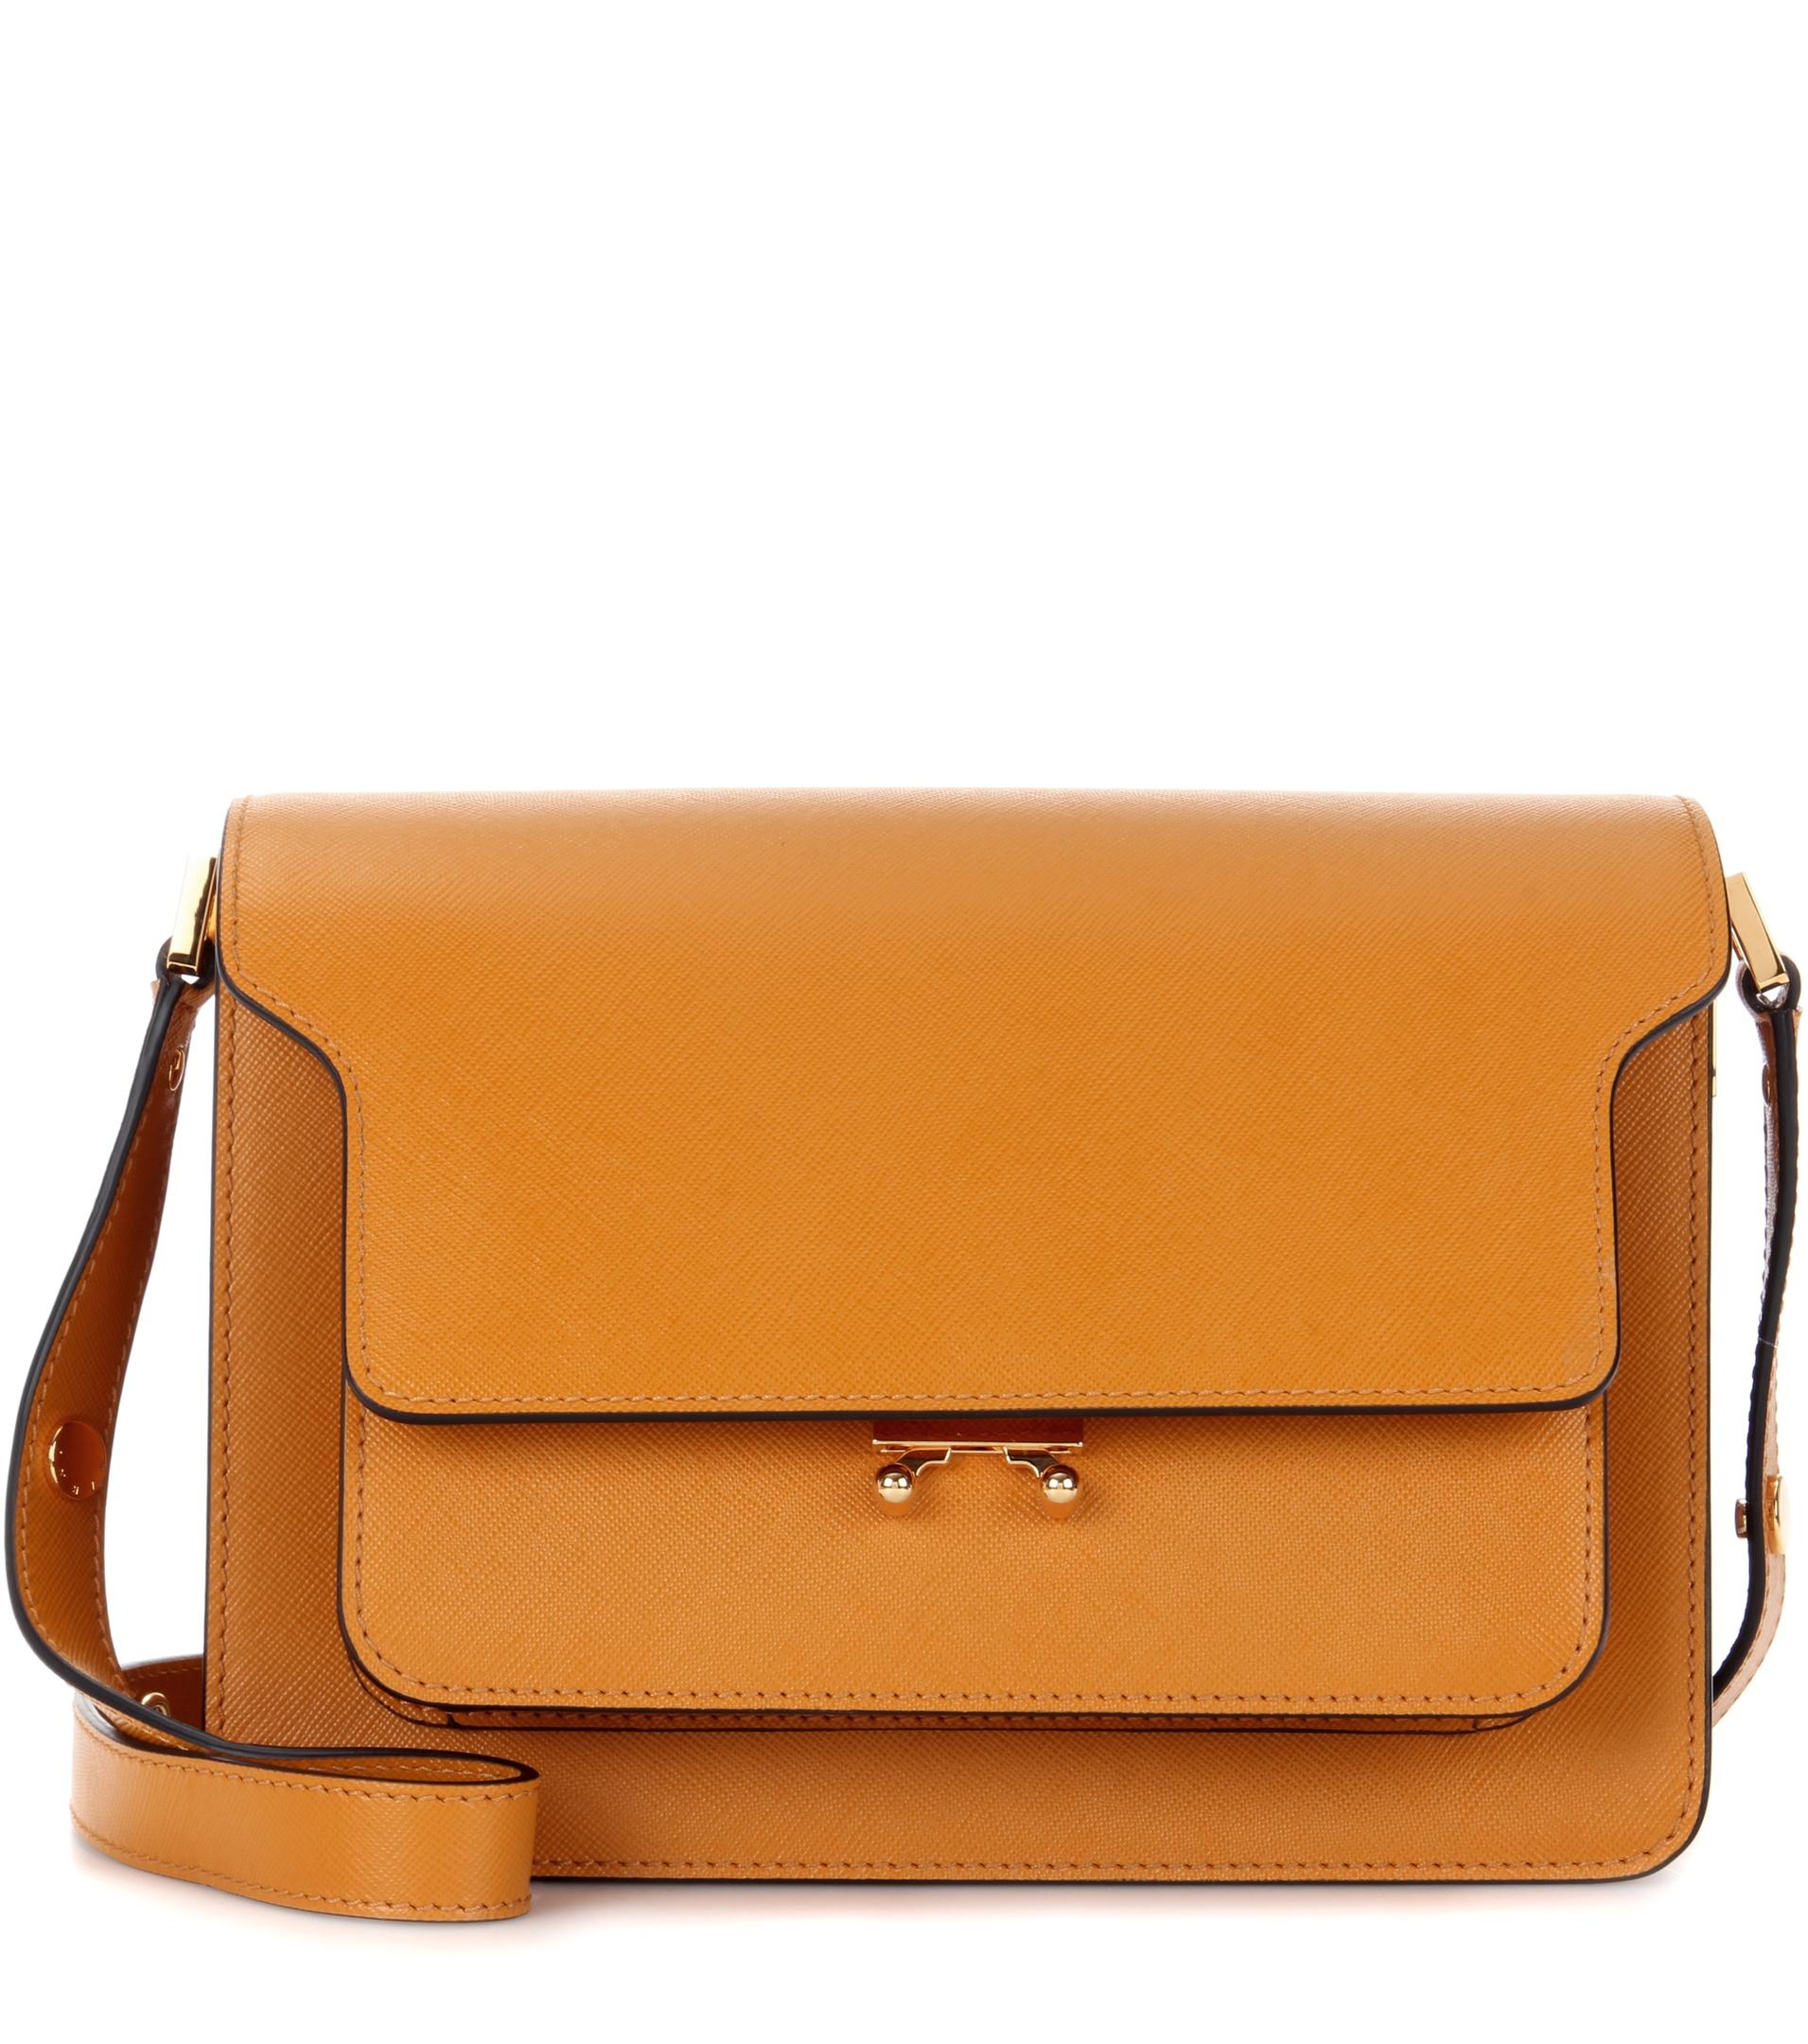 Marni Trunk Leather Shoulder Bag in Yellow - Lyst